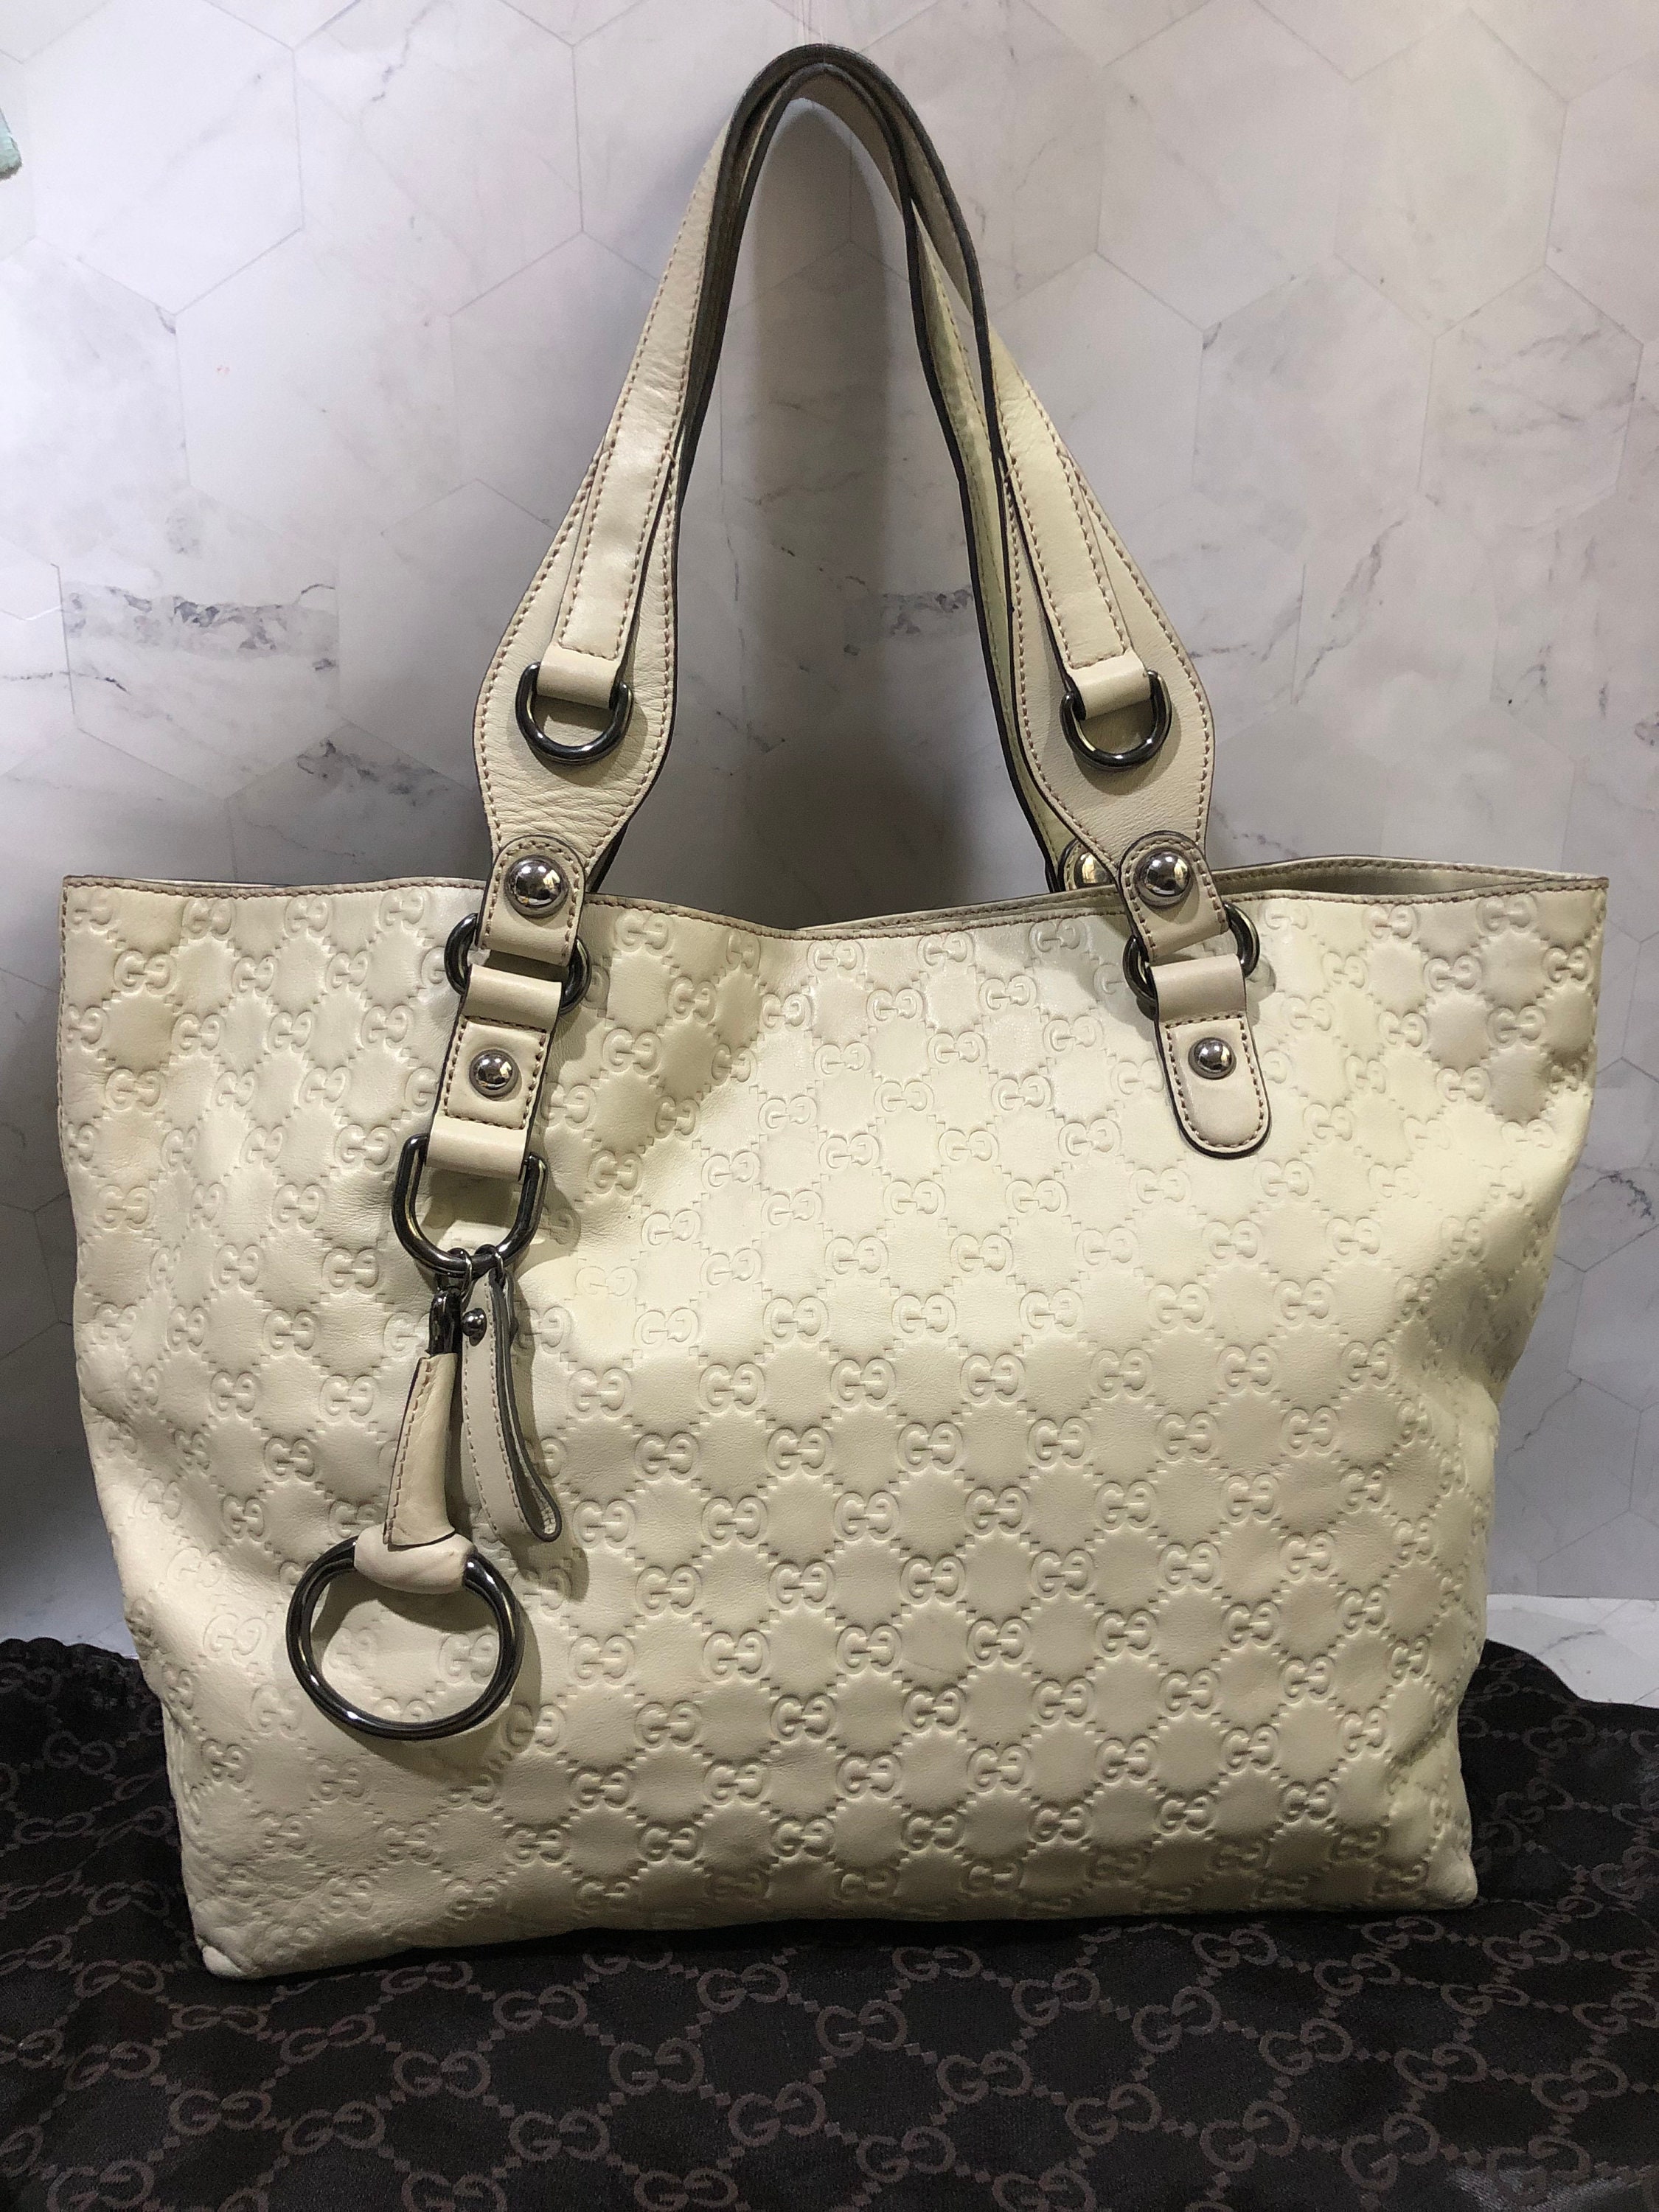 Gucci - Authenticated D-Ring Handbag - Cotton Beige for Women, Good Condition